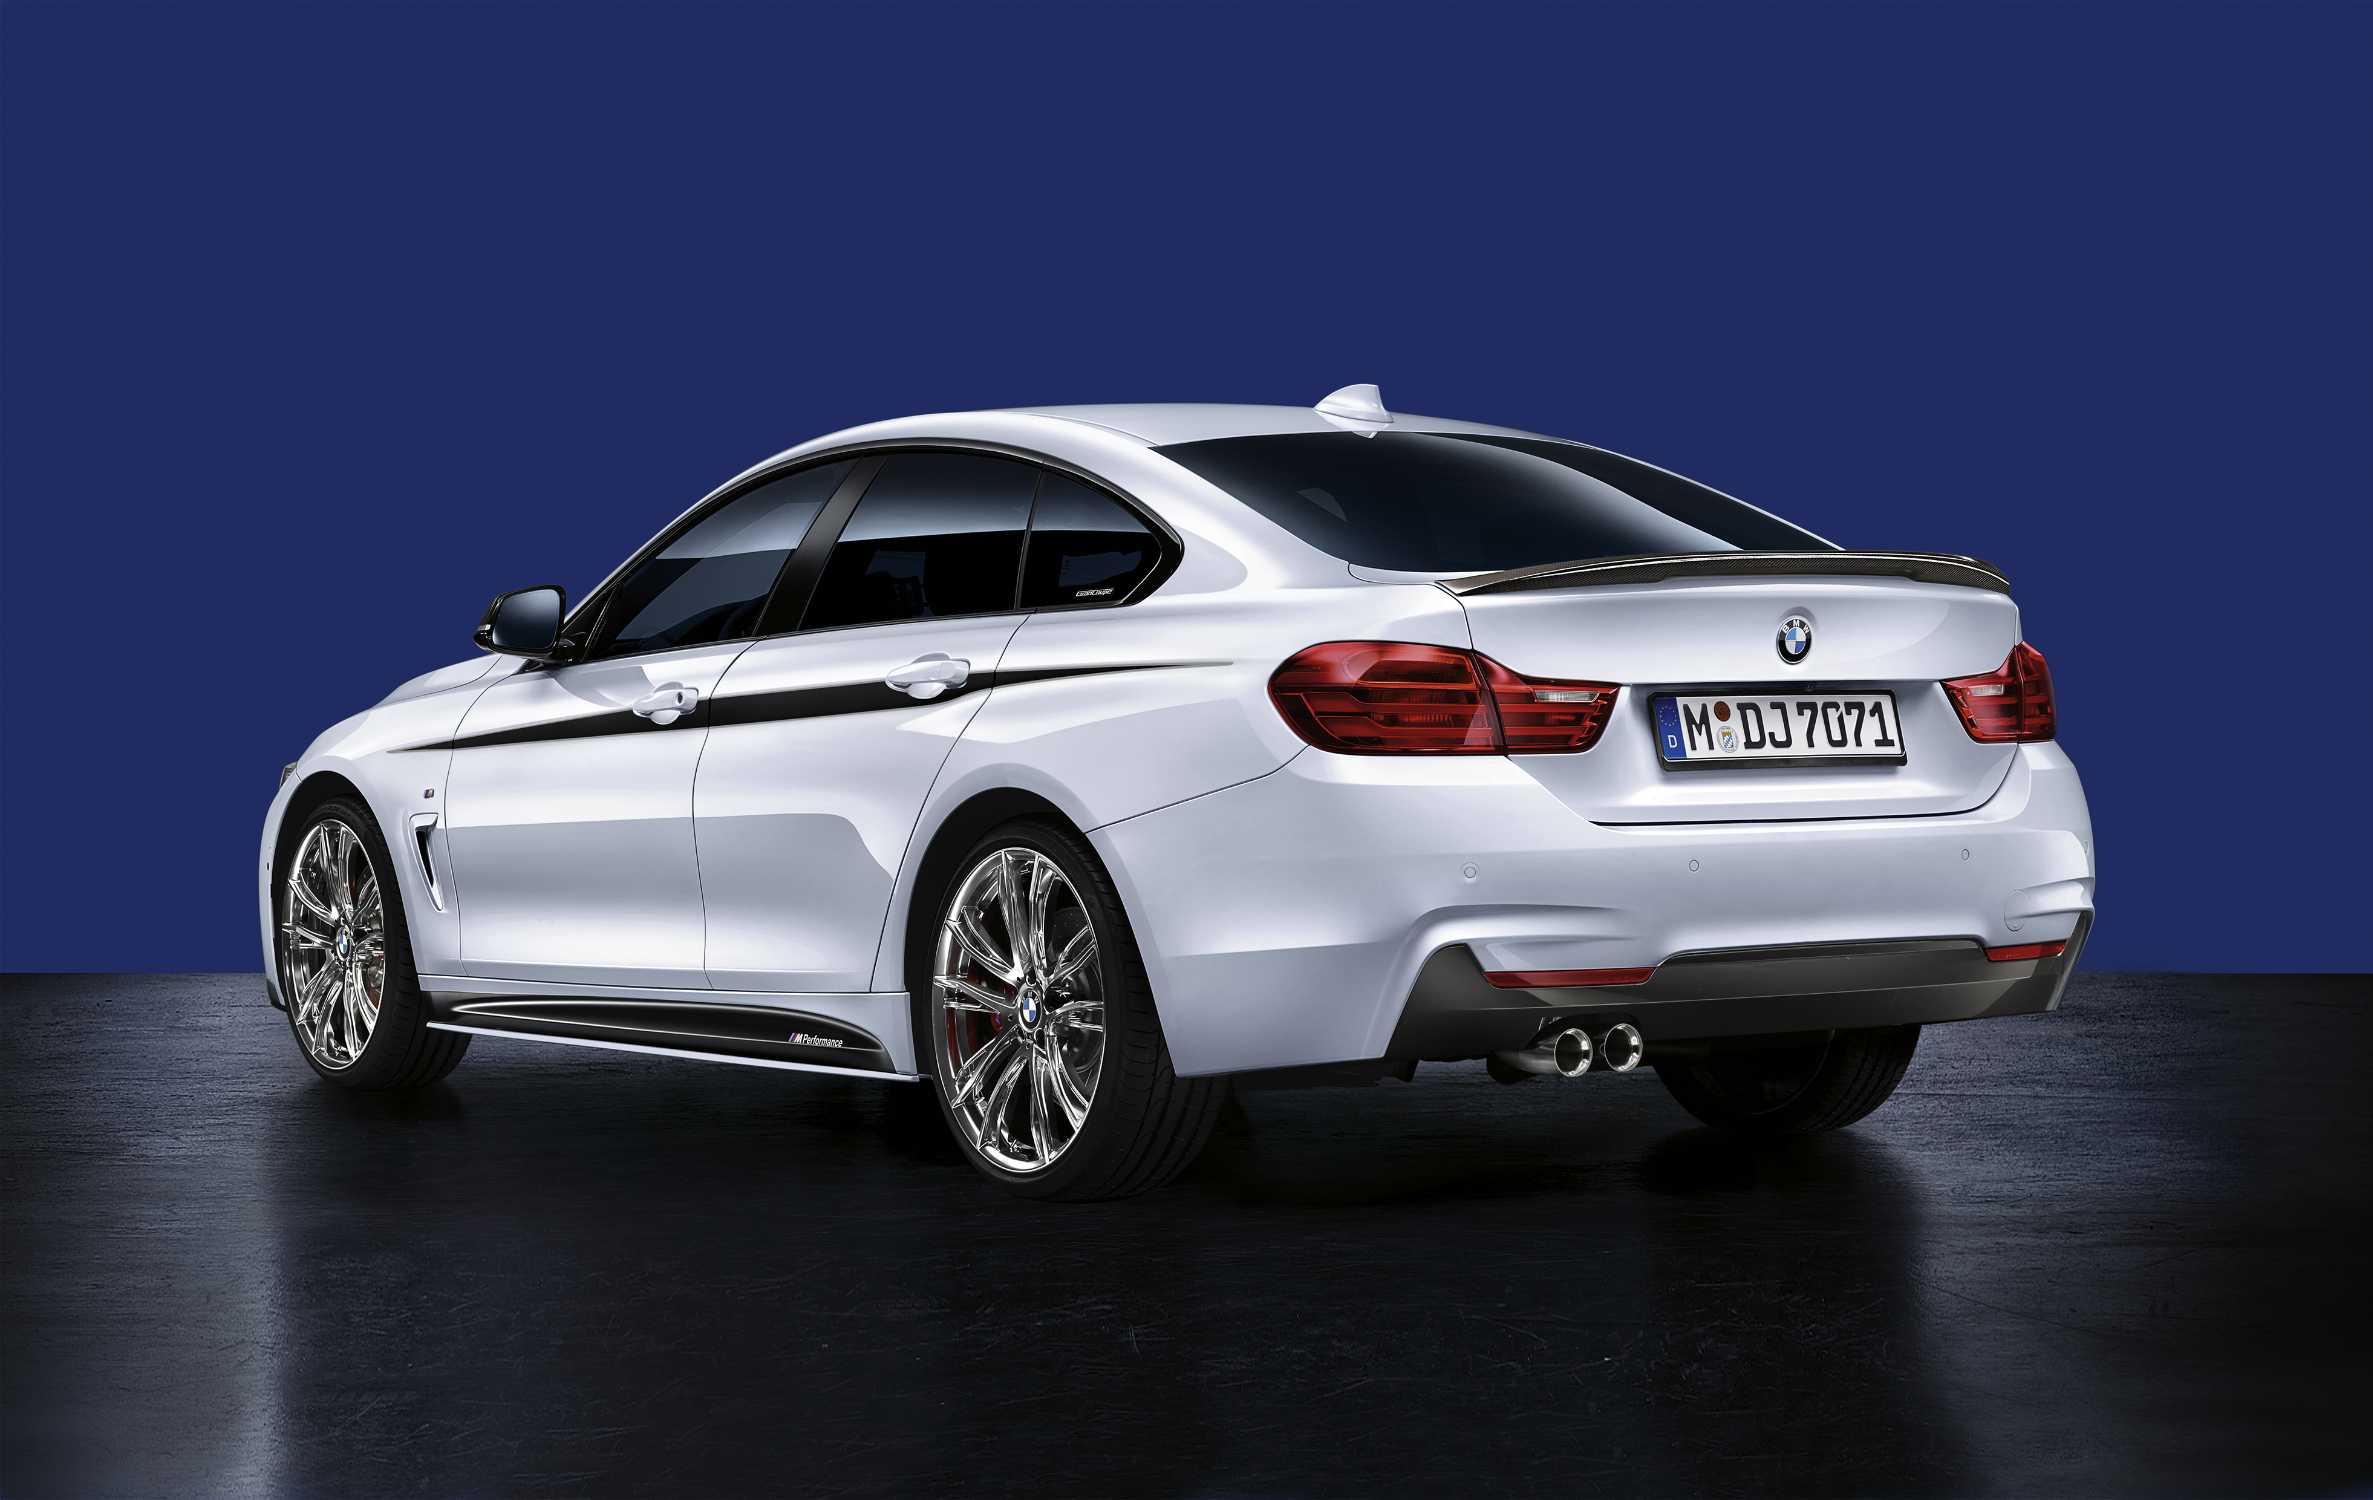 Amazing BMW 4 Series M Performance Pictures & Backgrounds